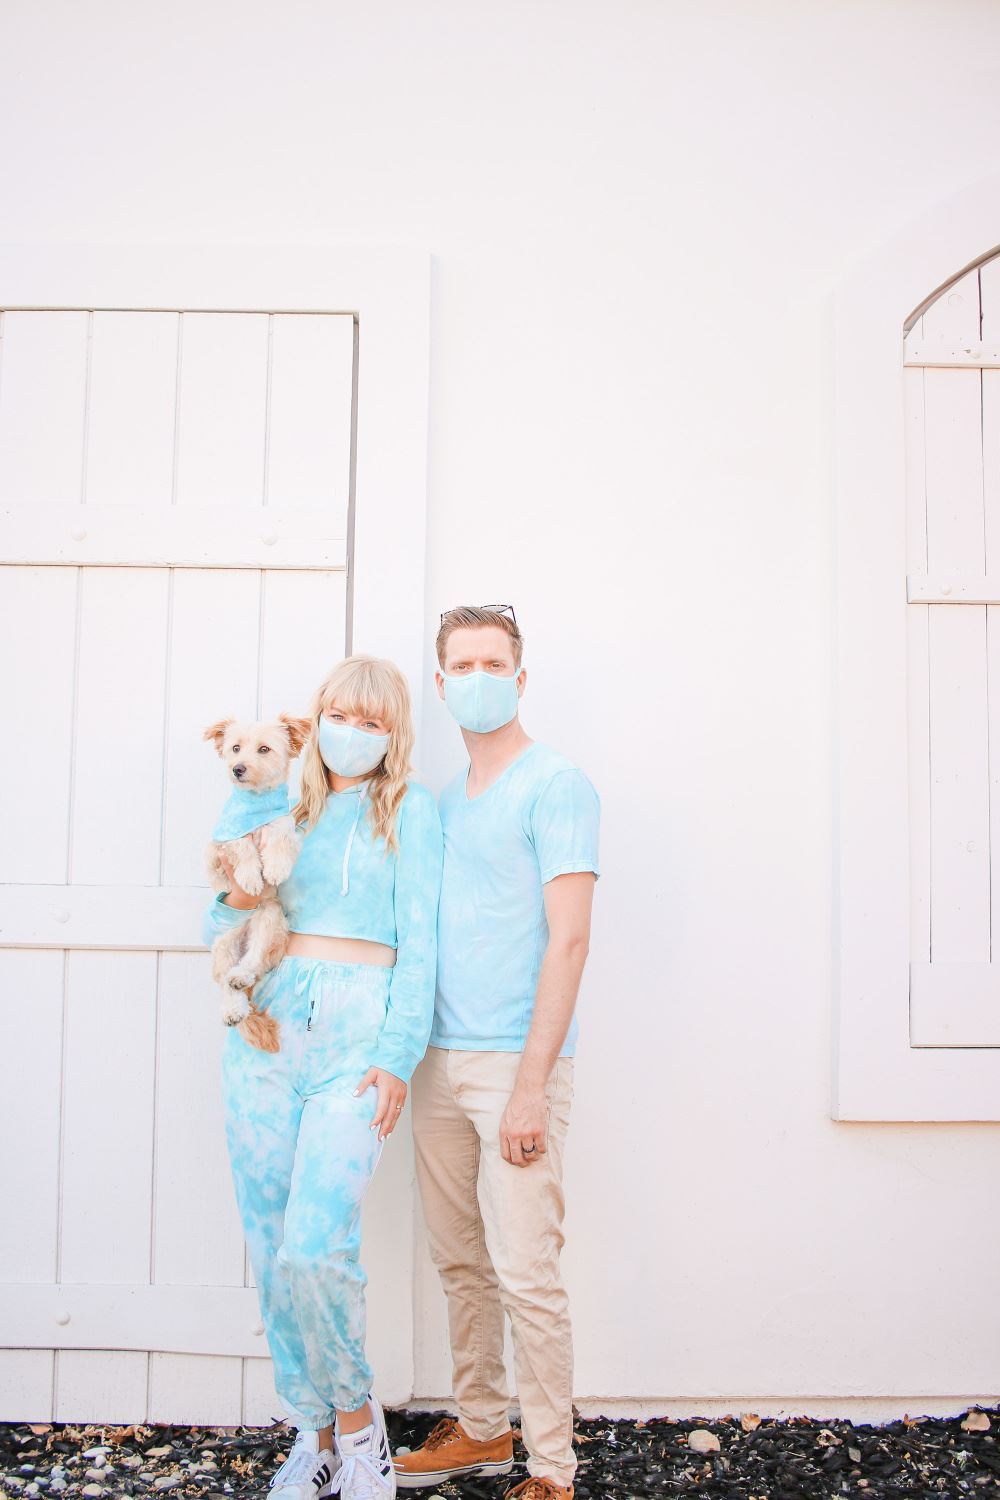 Matching tie-dye outfits and masks